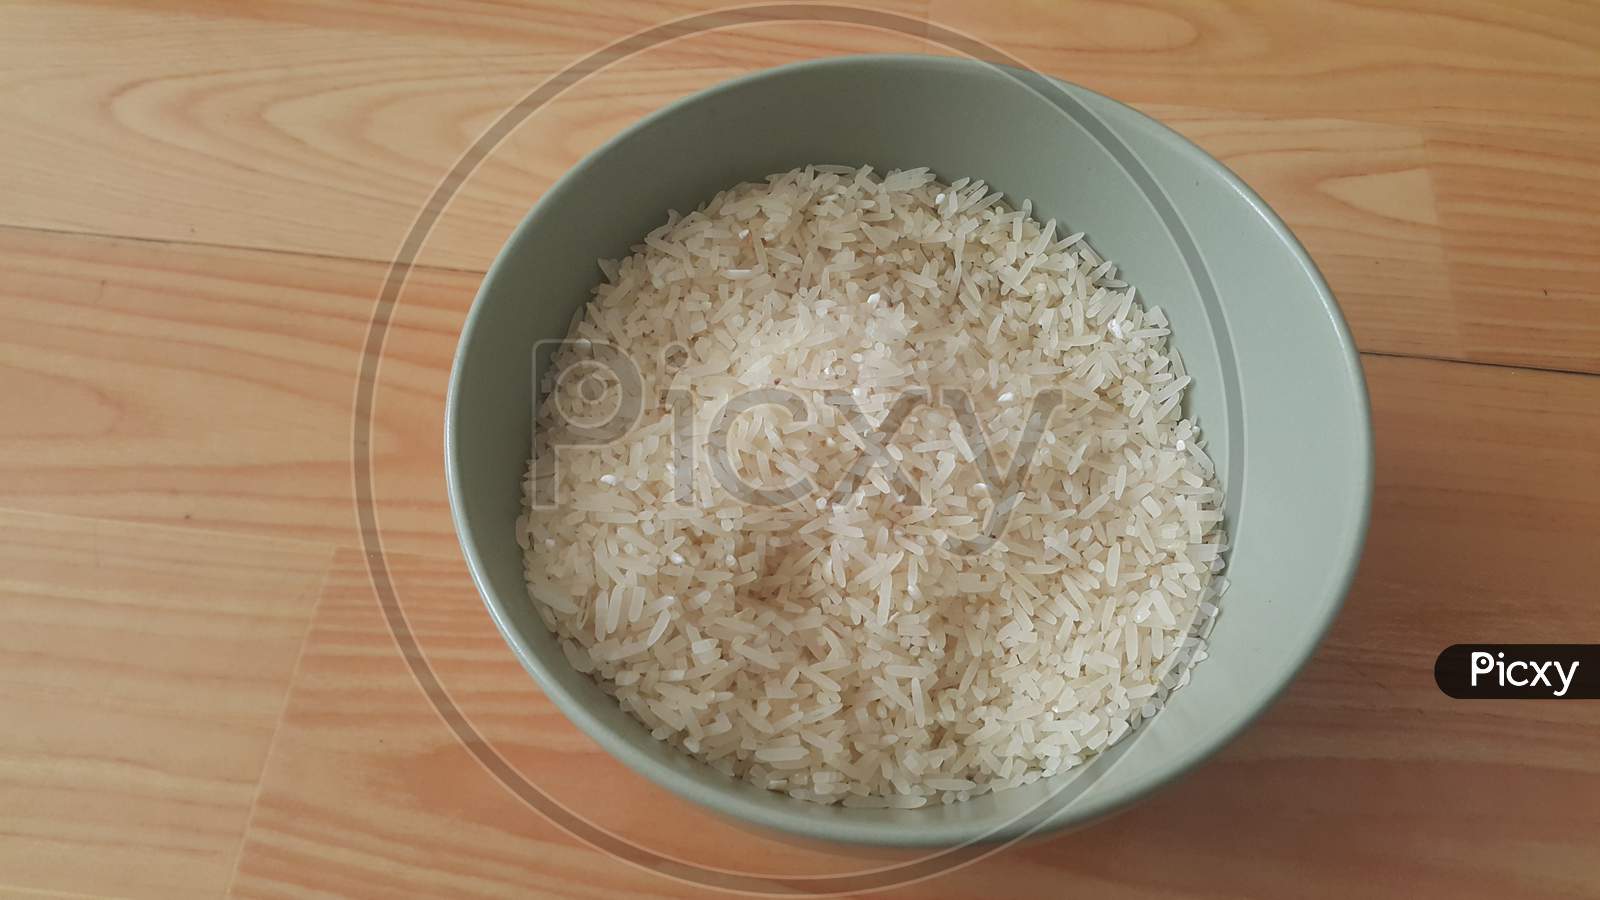 Top Closeup View Of Heap Of Rice In A Ceramic Bowl Placed Over Wooden Floor